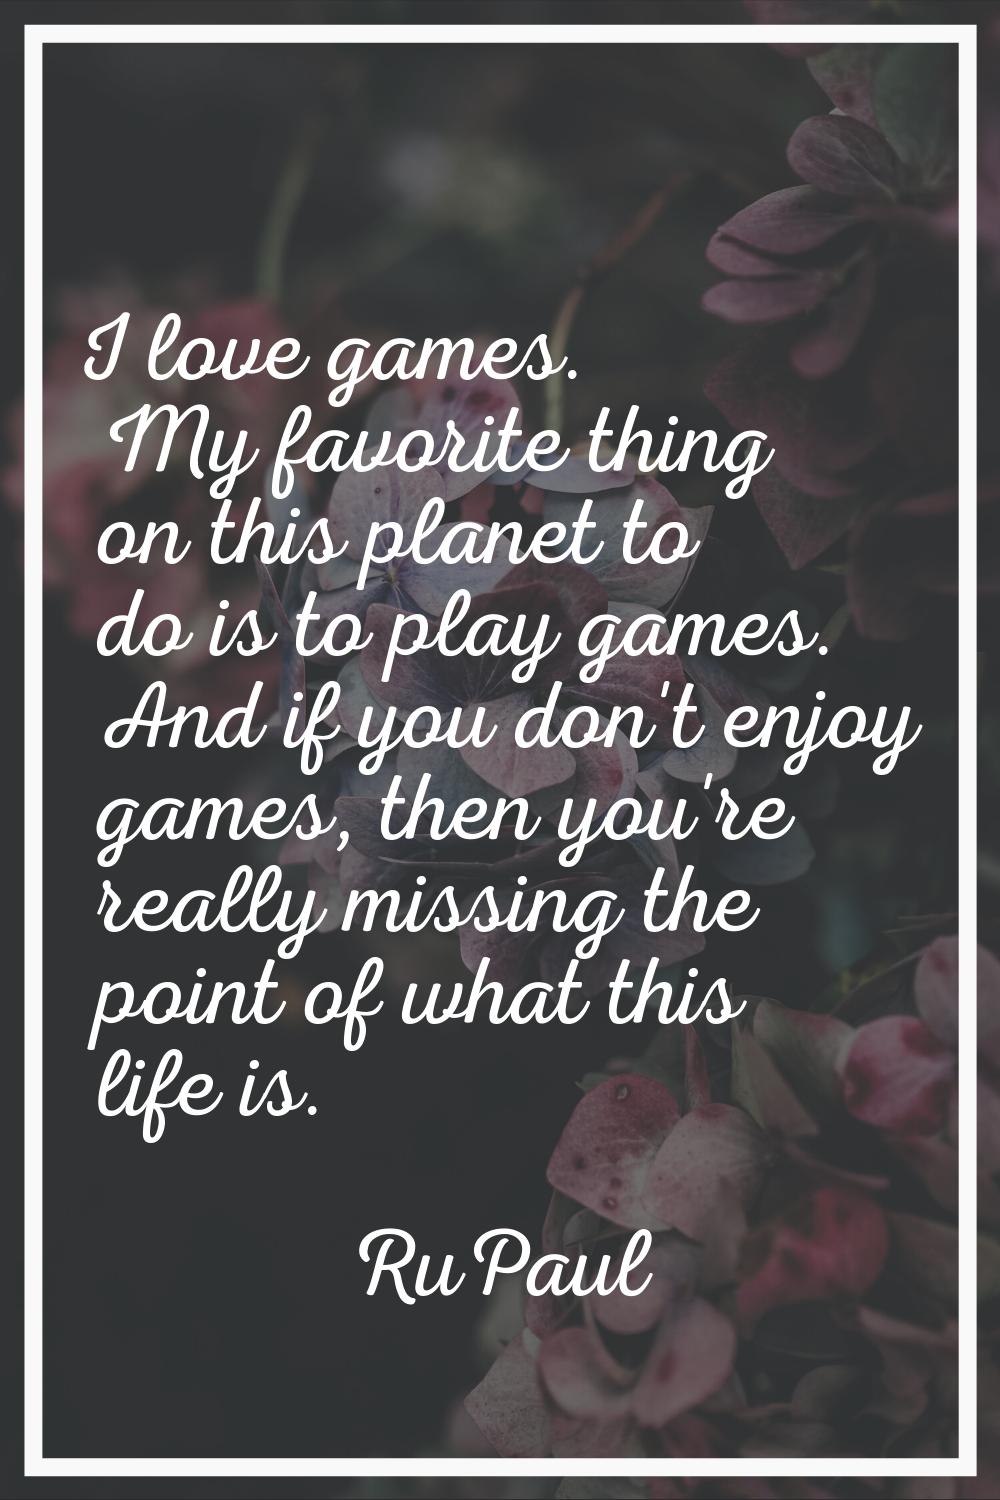 I love games. My favorite thing on this planet to do is to play games. And if you don't enjoy games